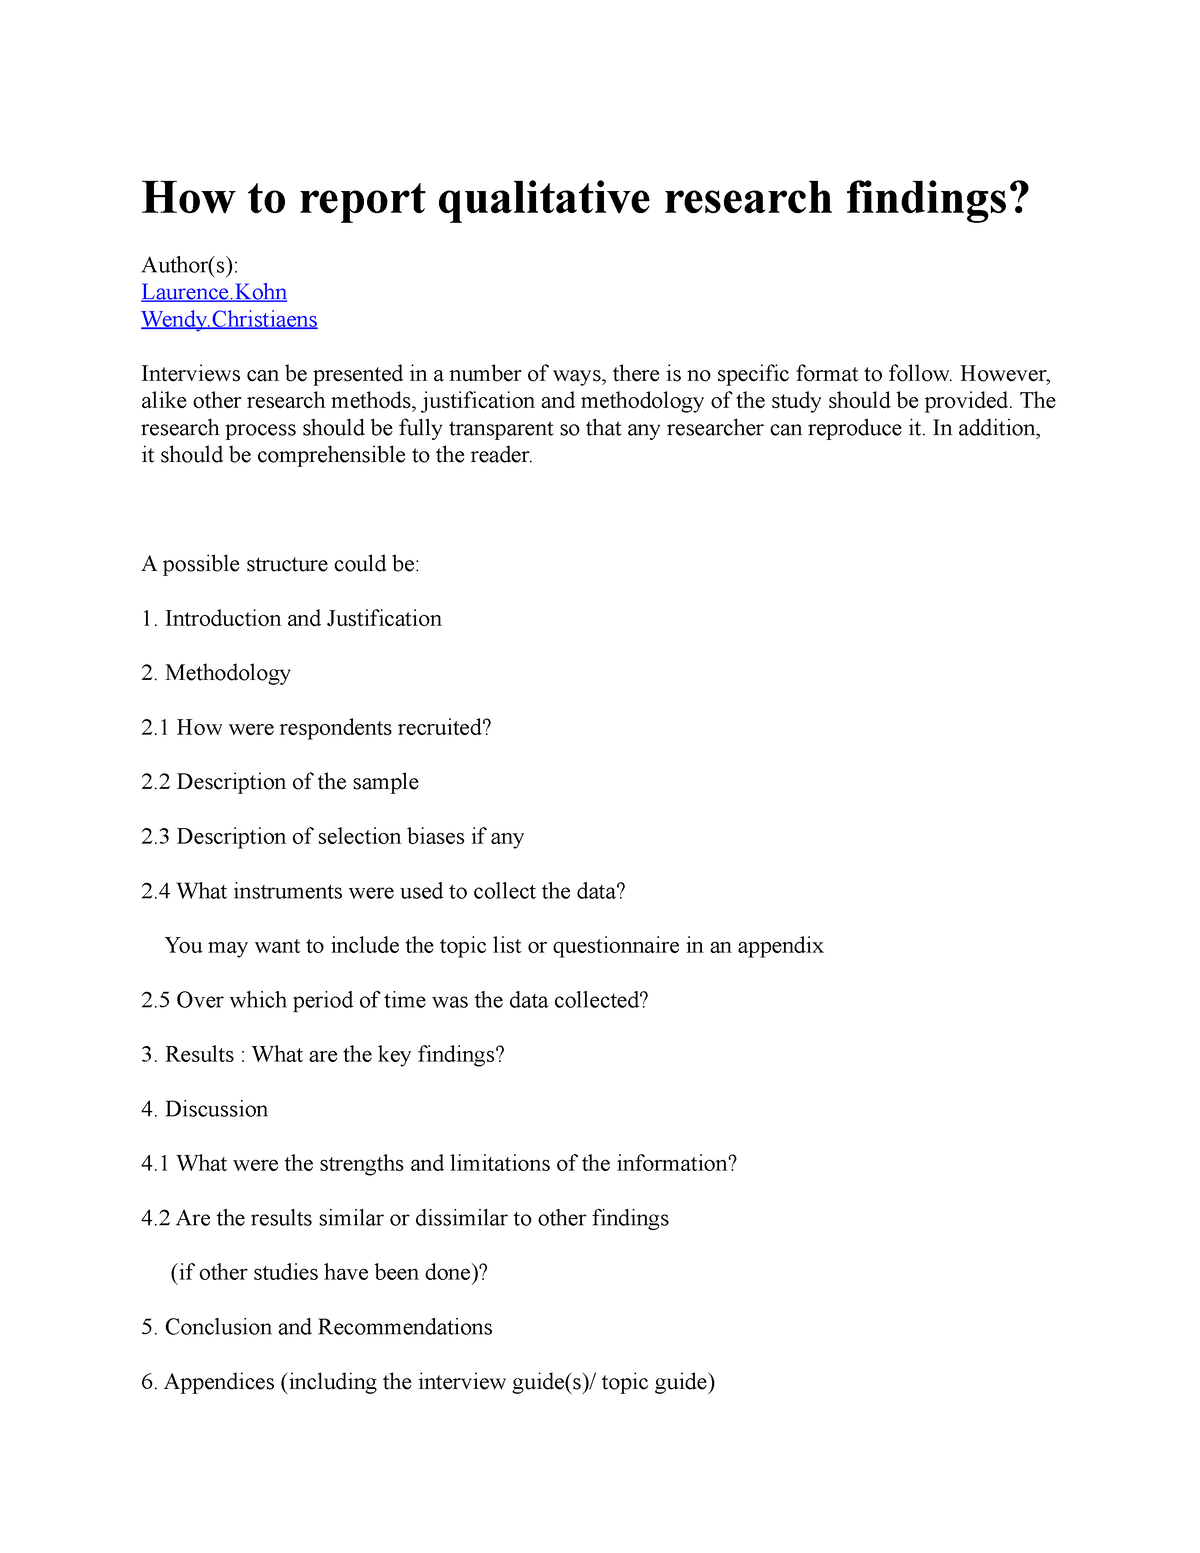 how to write a findings section for qualitative research